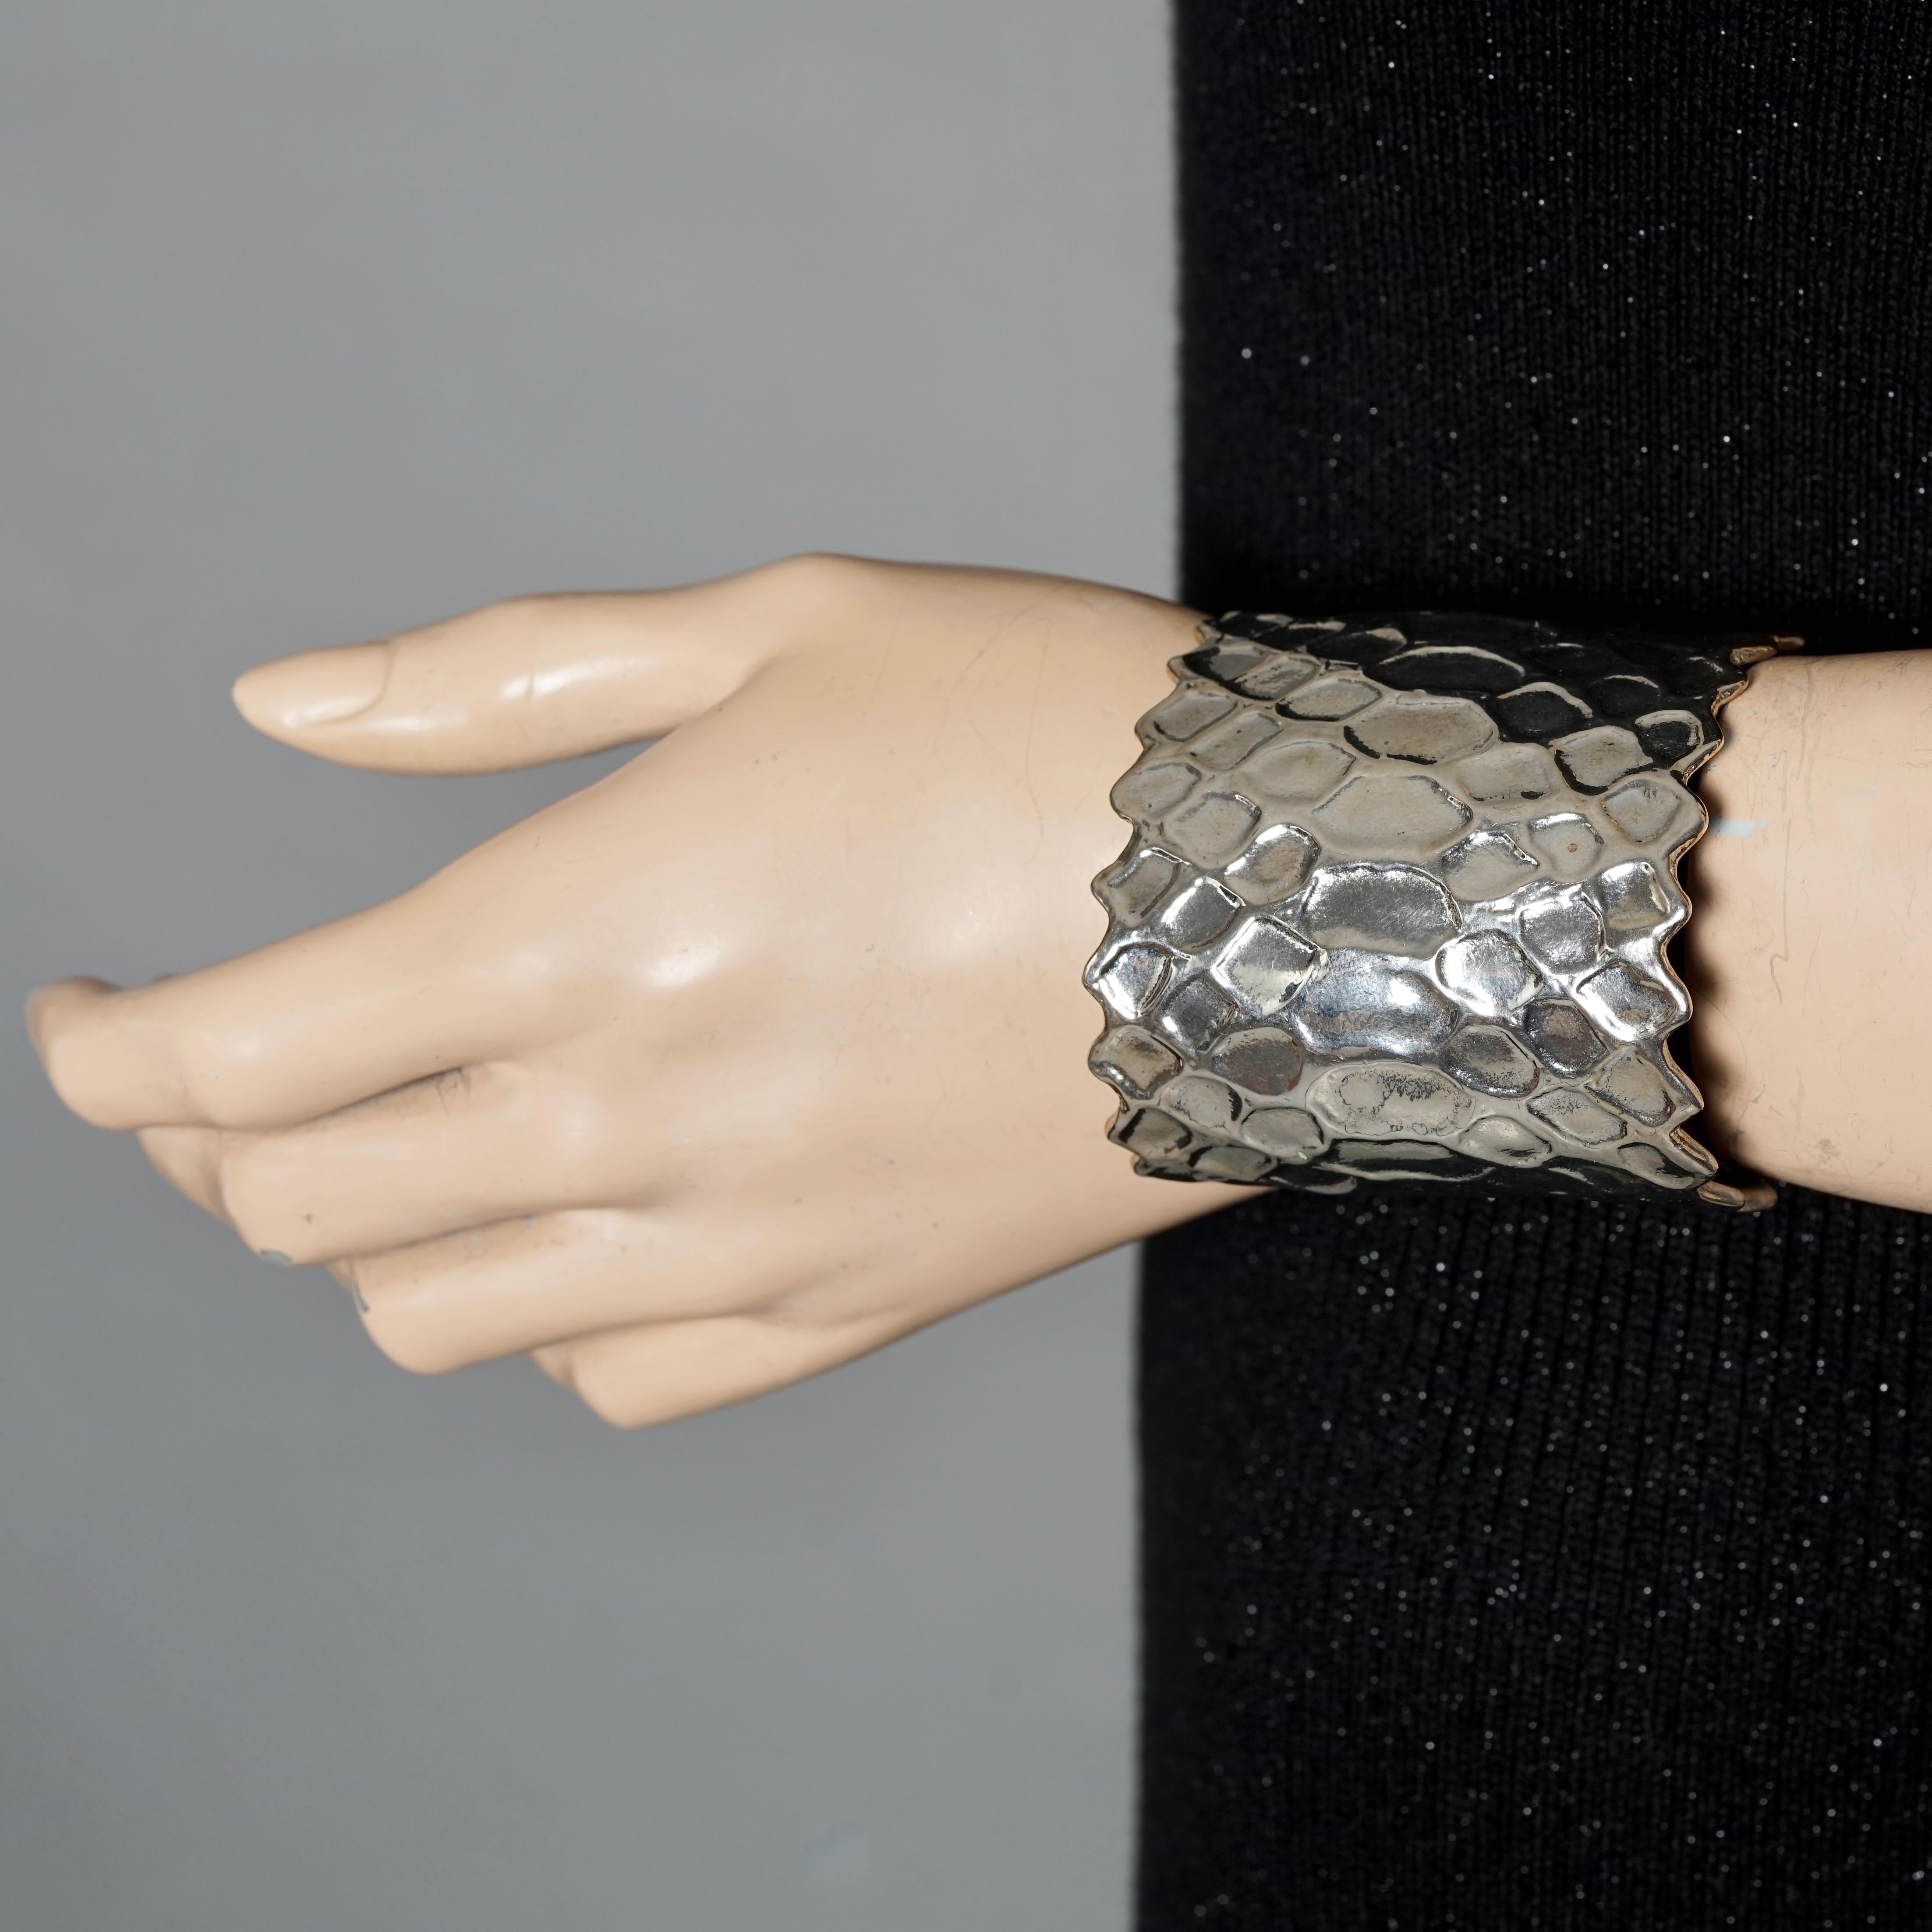 Vintage YVES SAINT LAURENT Ysl Snake Pattern Silver Cuff Bracelet

Measurements:
Height: 2.44 inches (6.2 cm)
Circumference: 6.55 inches (16.64 cm) opening included

Features:
- 100% Authentic YVES SAINT LAURENT.
- Intricate snake skin pattern